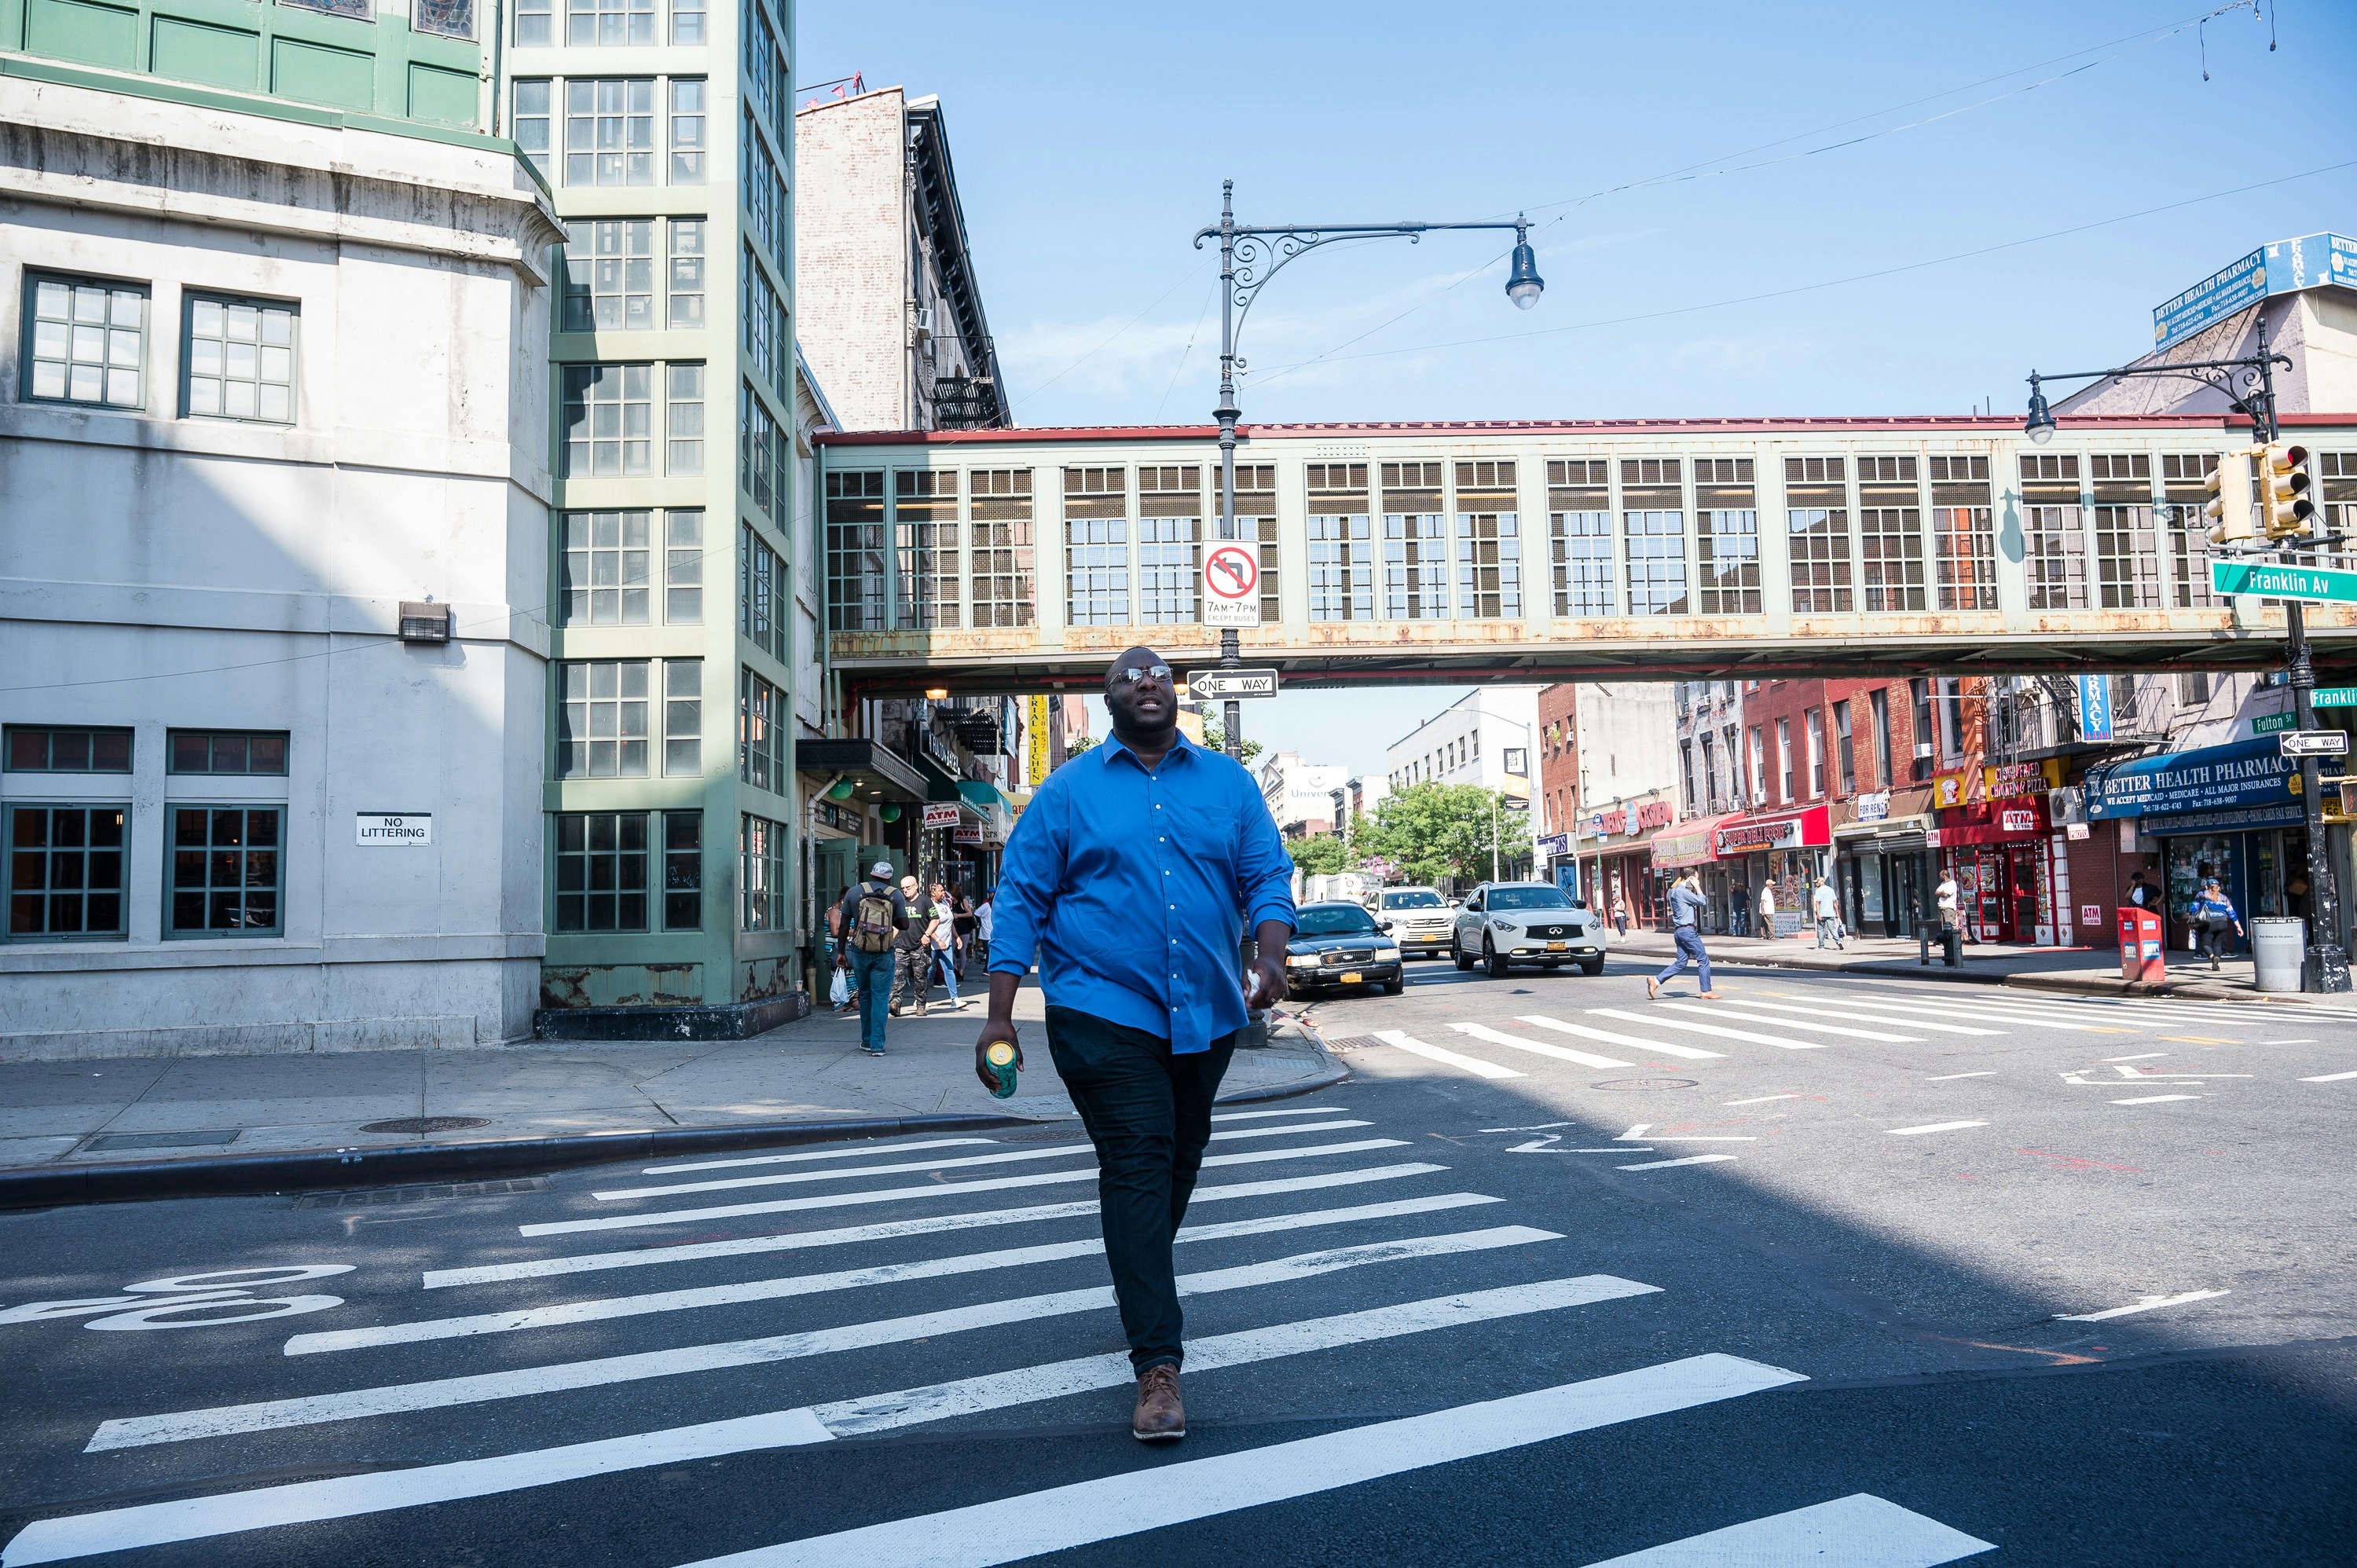 James walks along Fulton Street, a major thoroughfare that divides the Brooklyn neighborhoods of  Clinton Hill and Prospect Heights , on August 19, 2019.